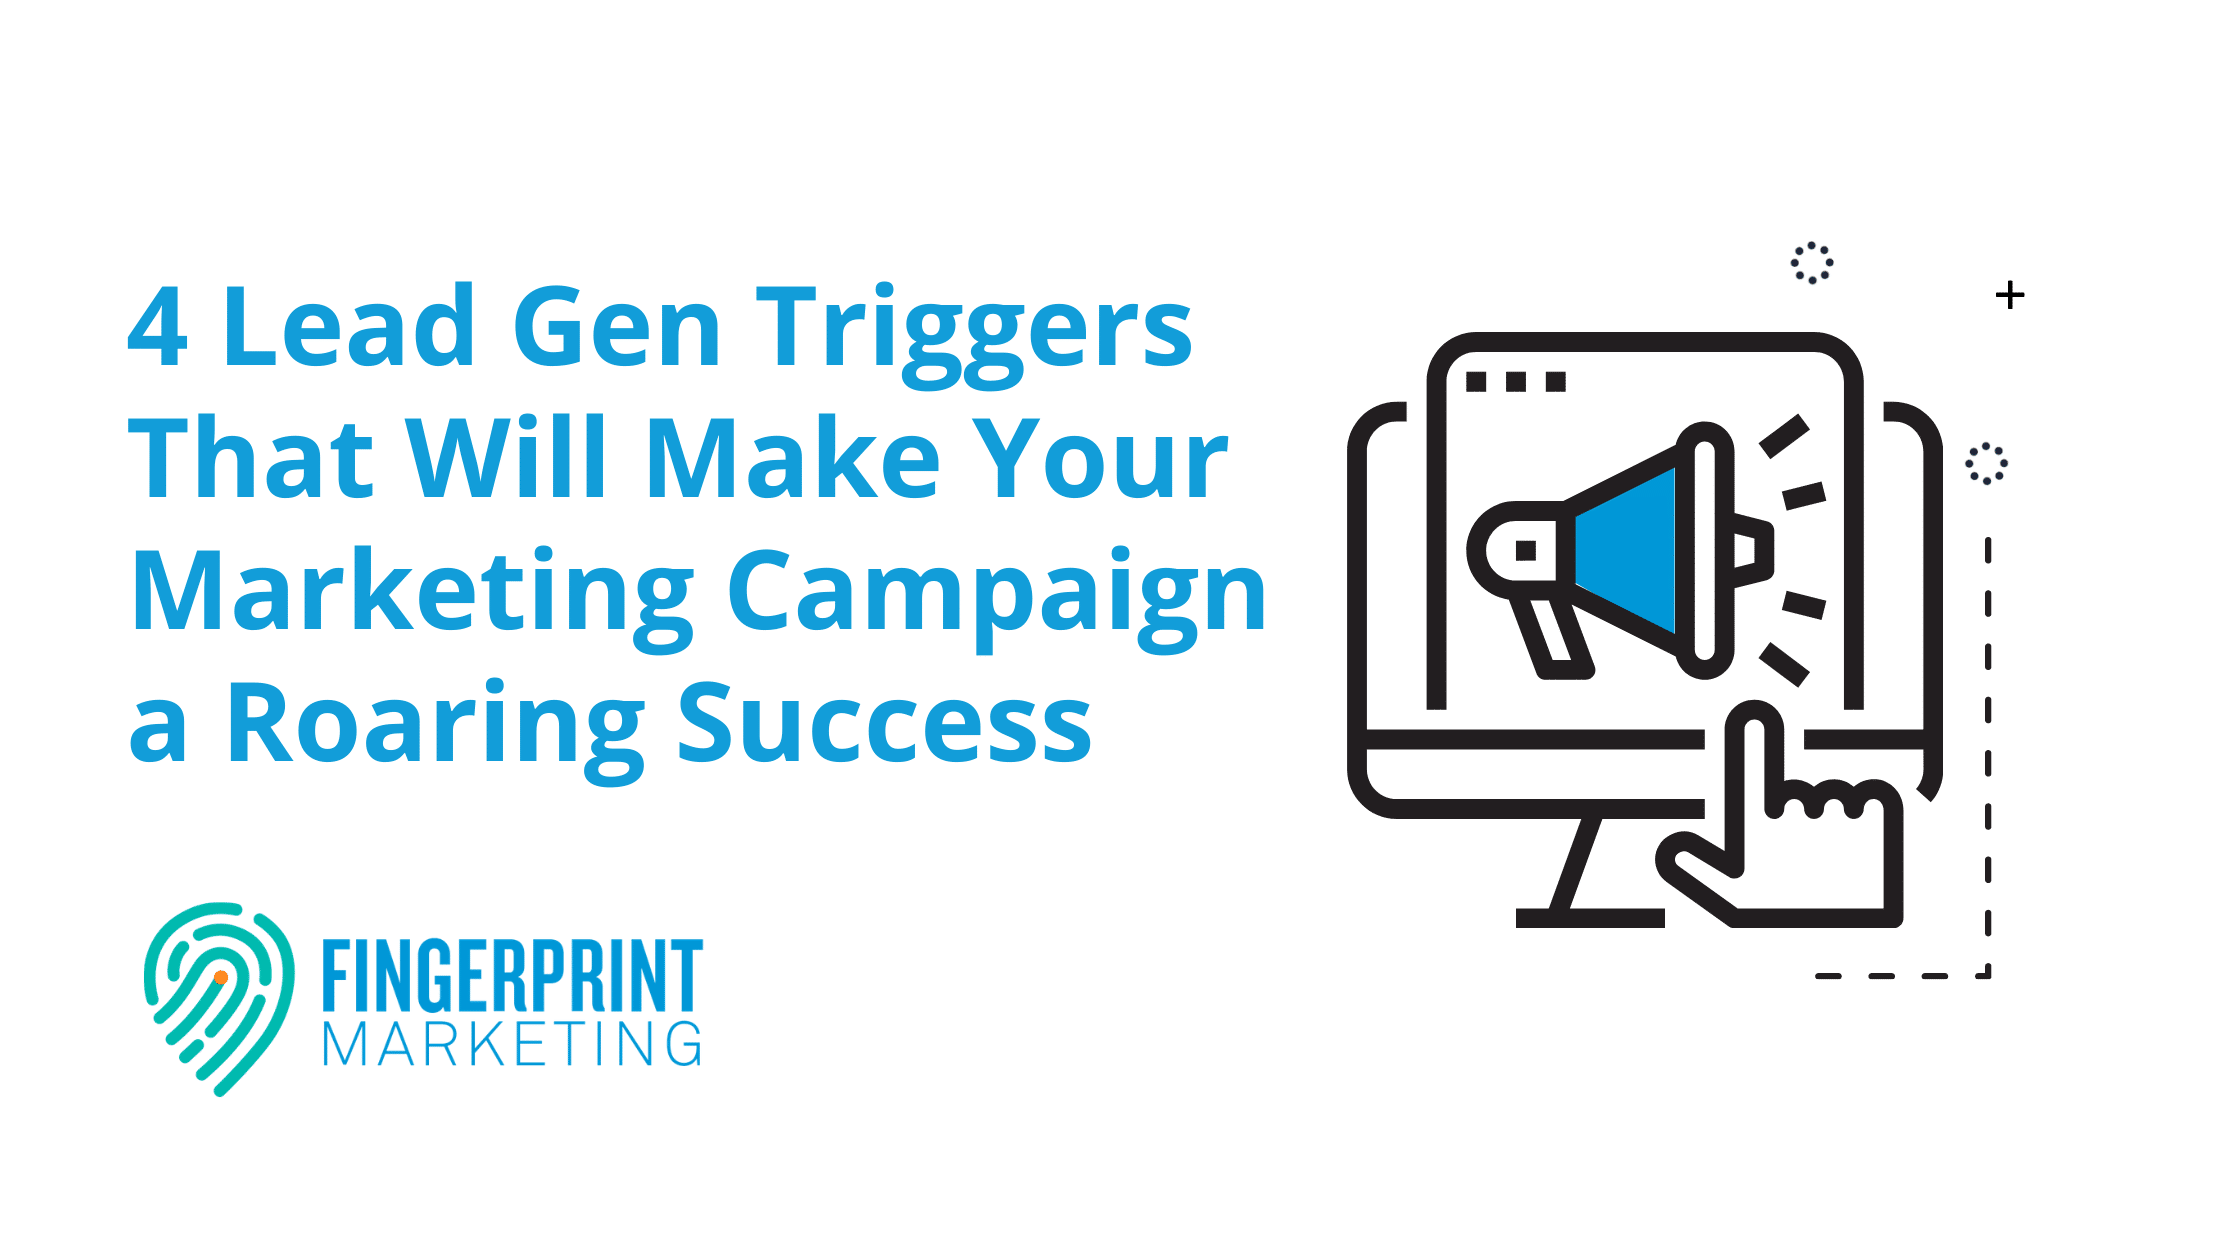 4 Lead Gen Triggers That Will Make Your Marketing Campaign a Roaring Success